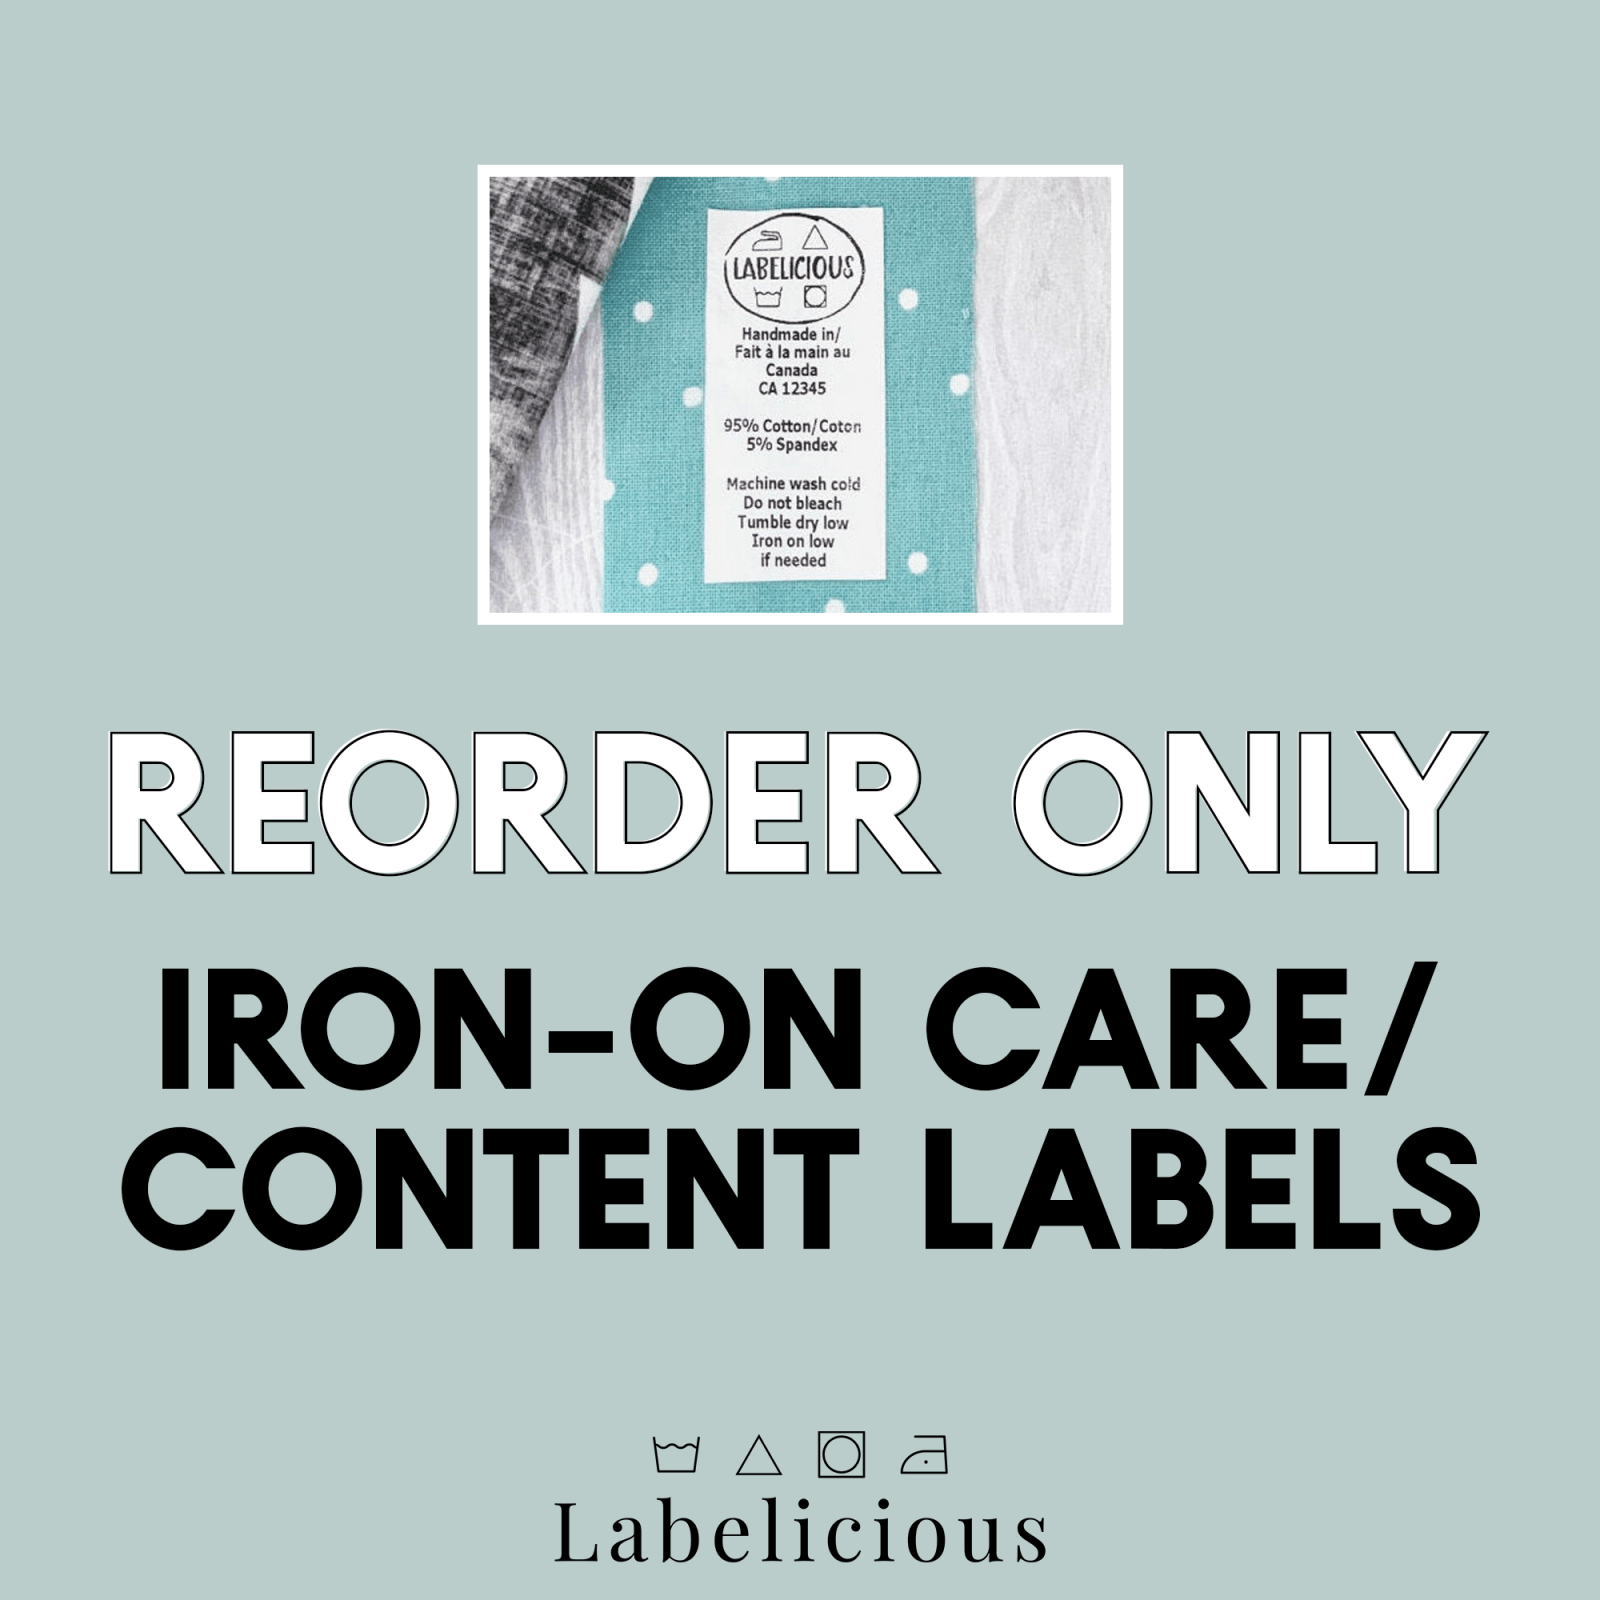 re-order-only-iron-on-carecontent-labels-928773.png